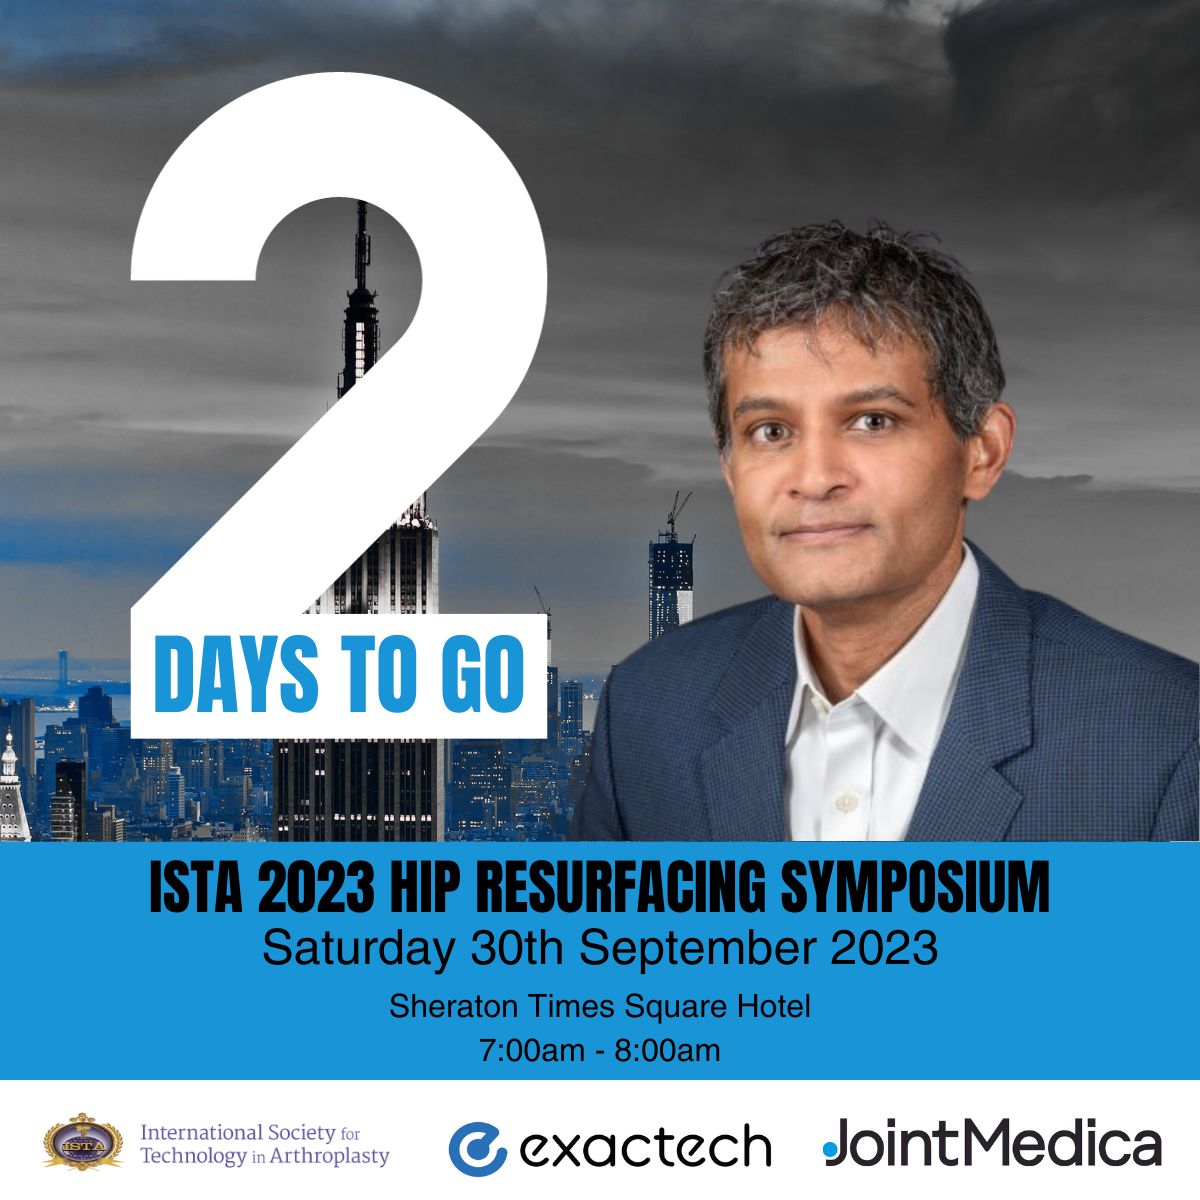 Just two more sleeps to go! Join moderator @DrSharatKusuma  this Saturday (30th September) for this years #ISTA2023 hip resurfacing symposium 'Don't Amputate the Femoral Head, Resurface Instead' and hear the real story from a global hip resurfacing key opinion leader group with a